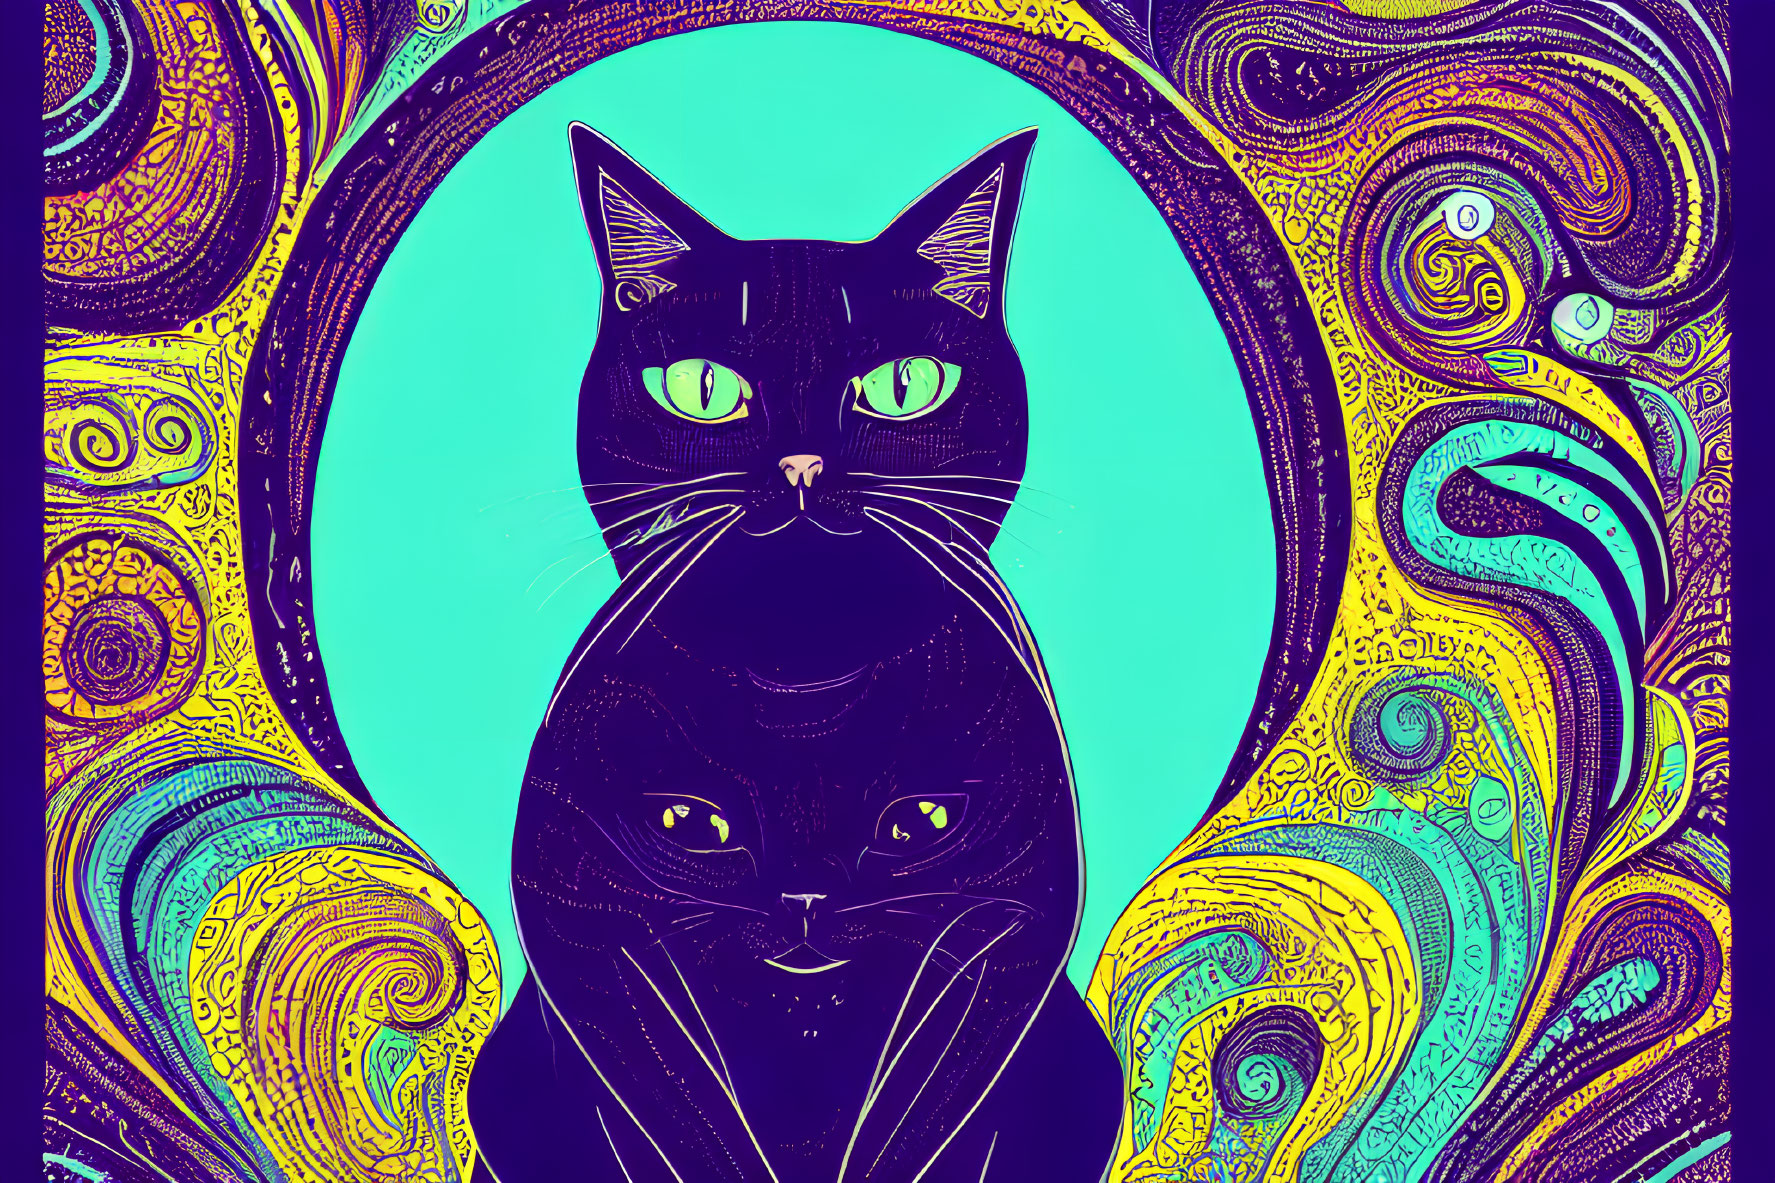 Colorful Psychedelic Swirl Background with Black Cat Illustration